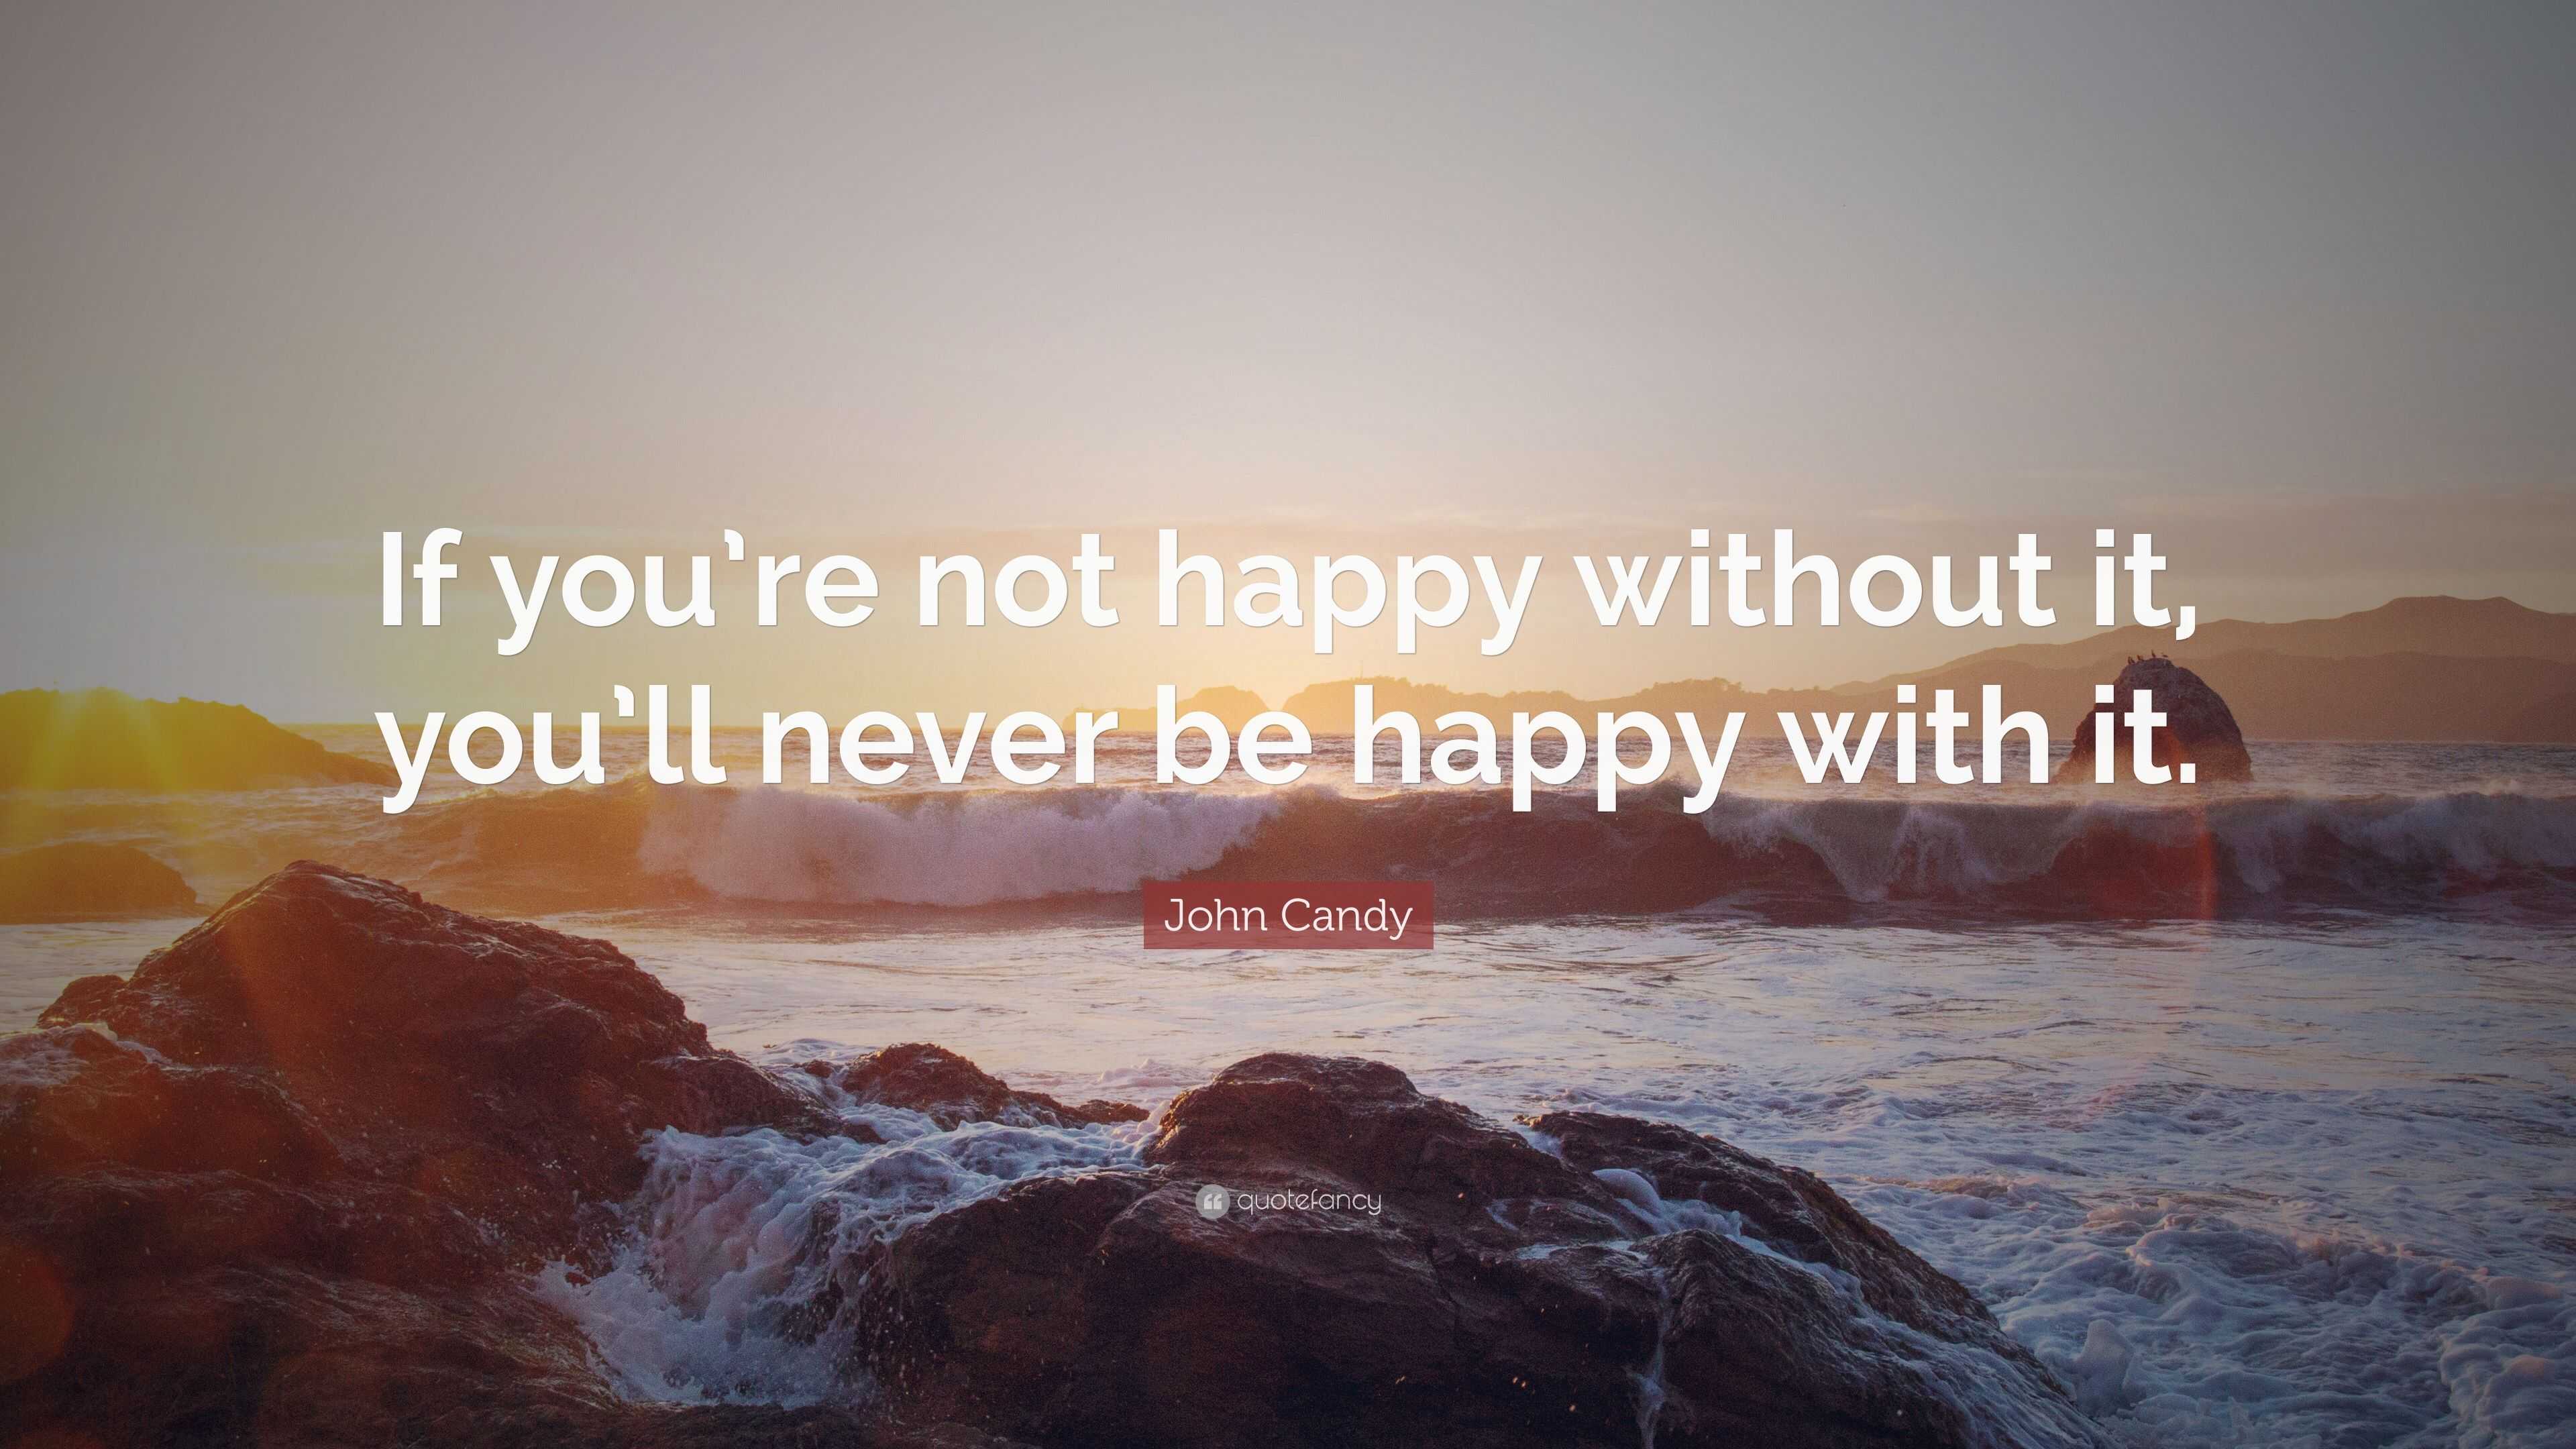 John Candy Quote: “If you’re not happy without it, you’ll never be ...